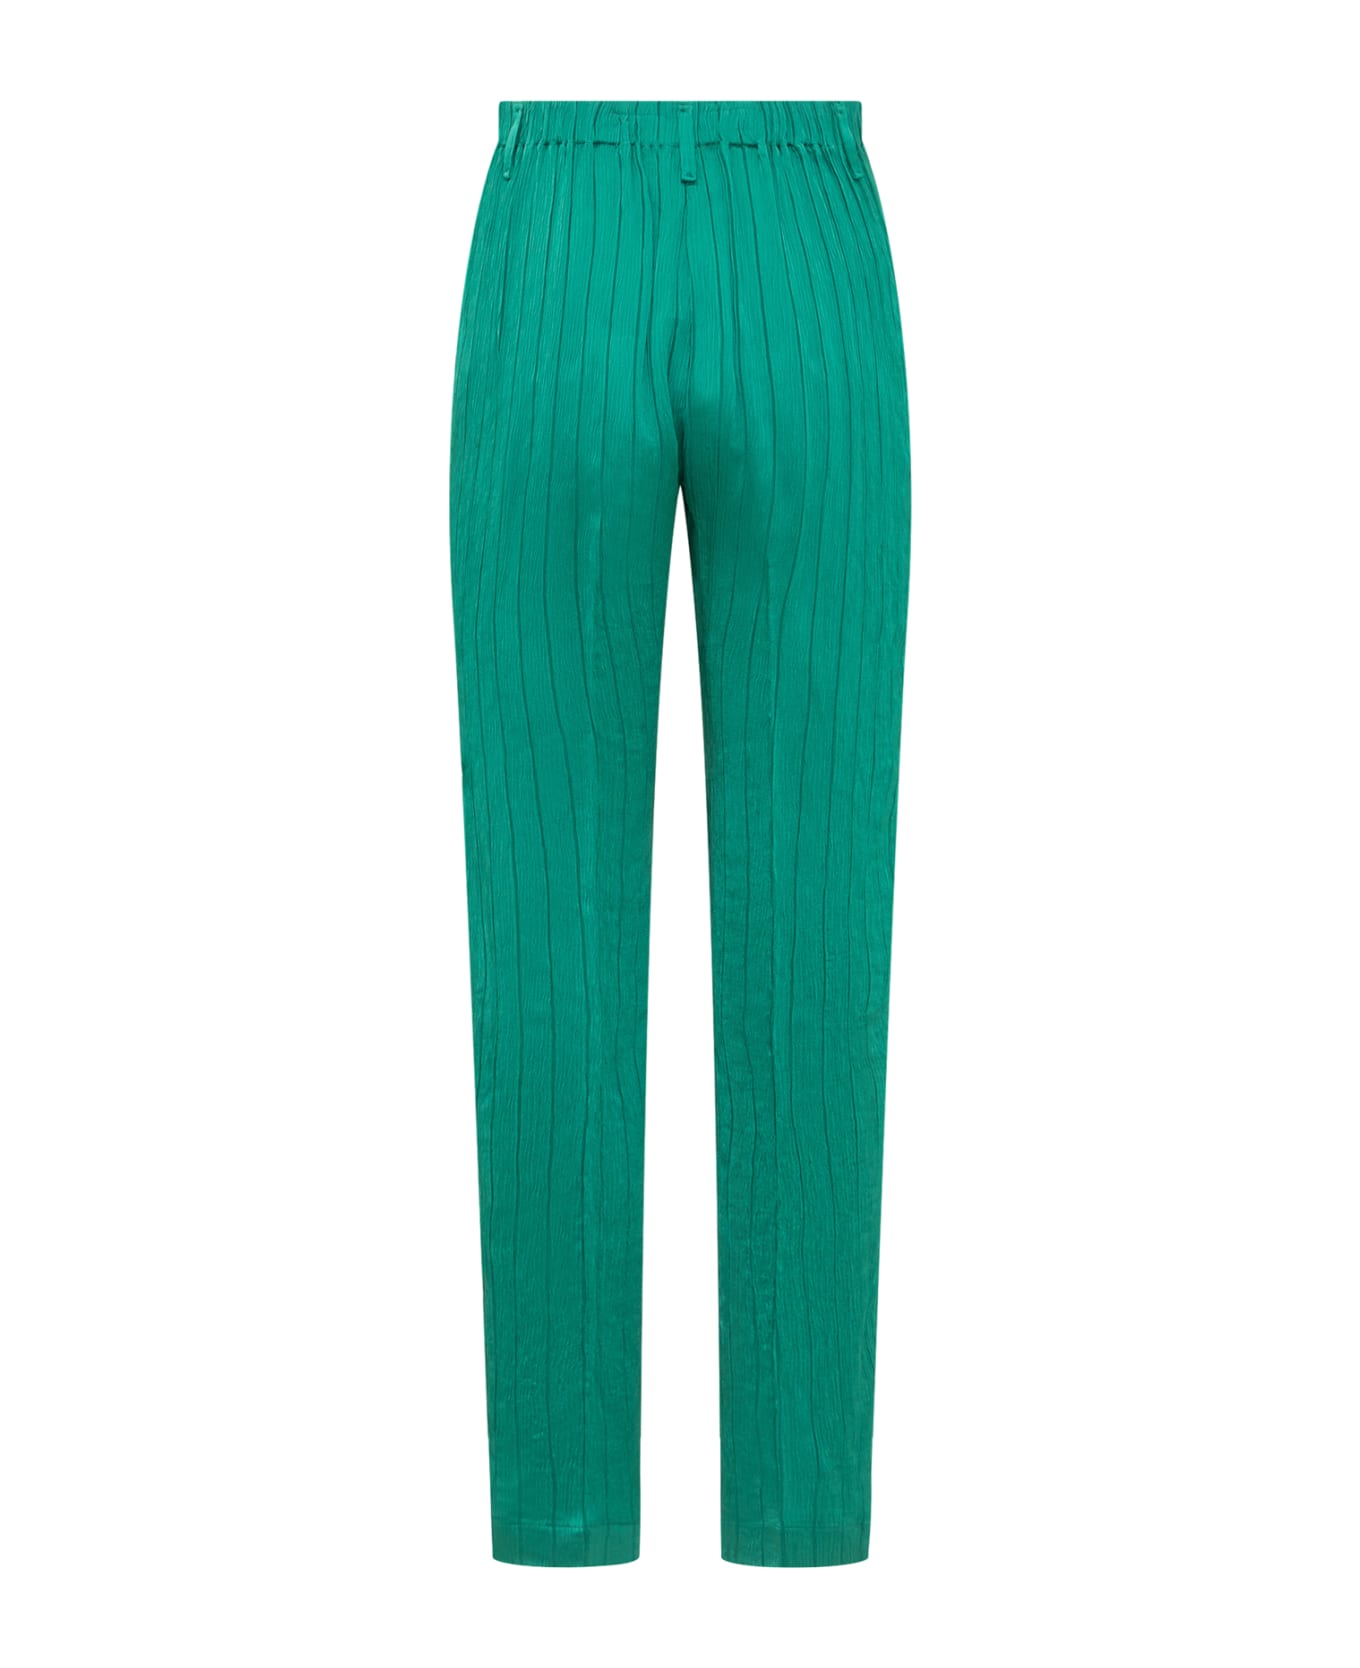 Forte_Forte Striped Trousers - EMERALD ボトムス